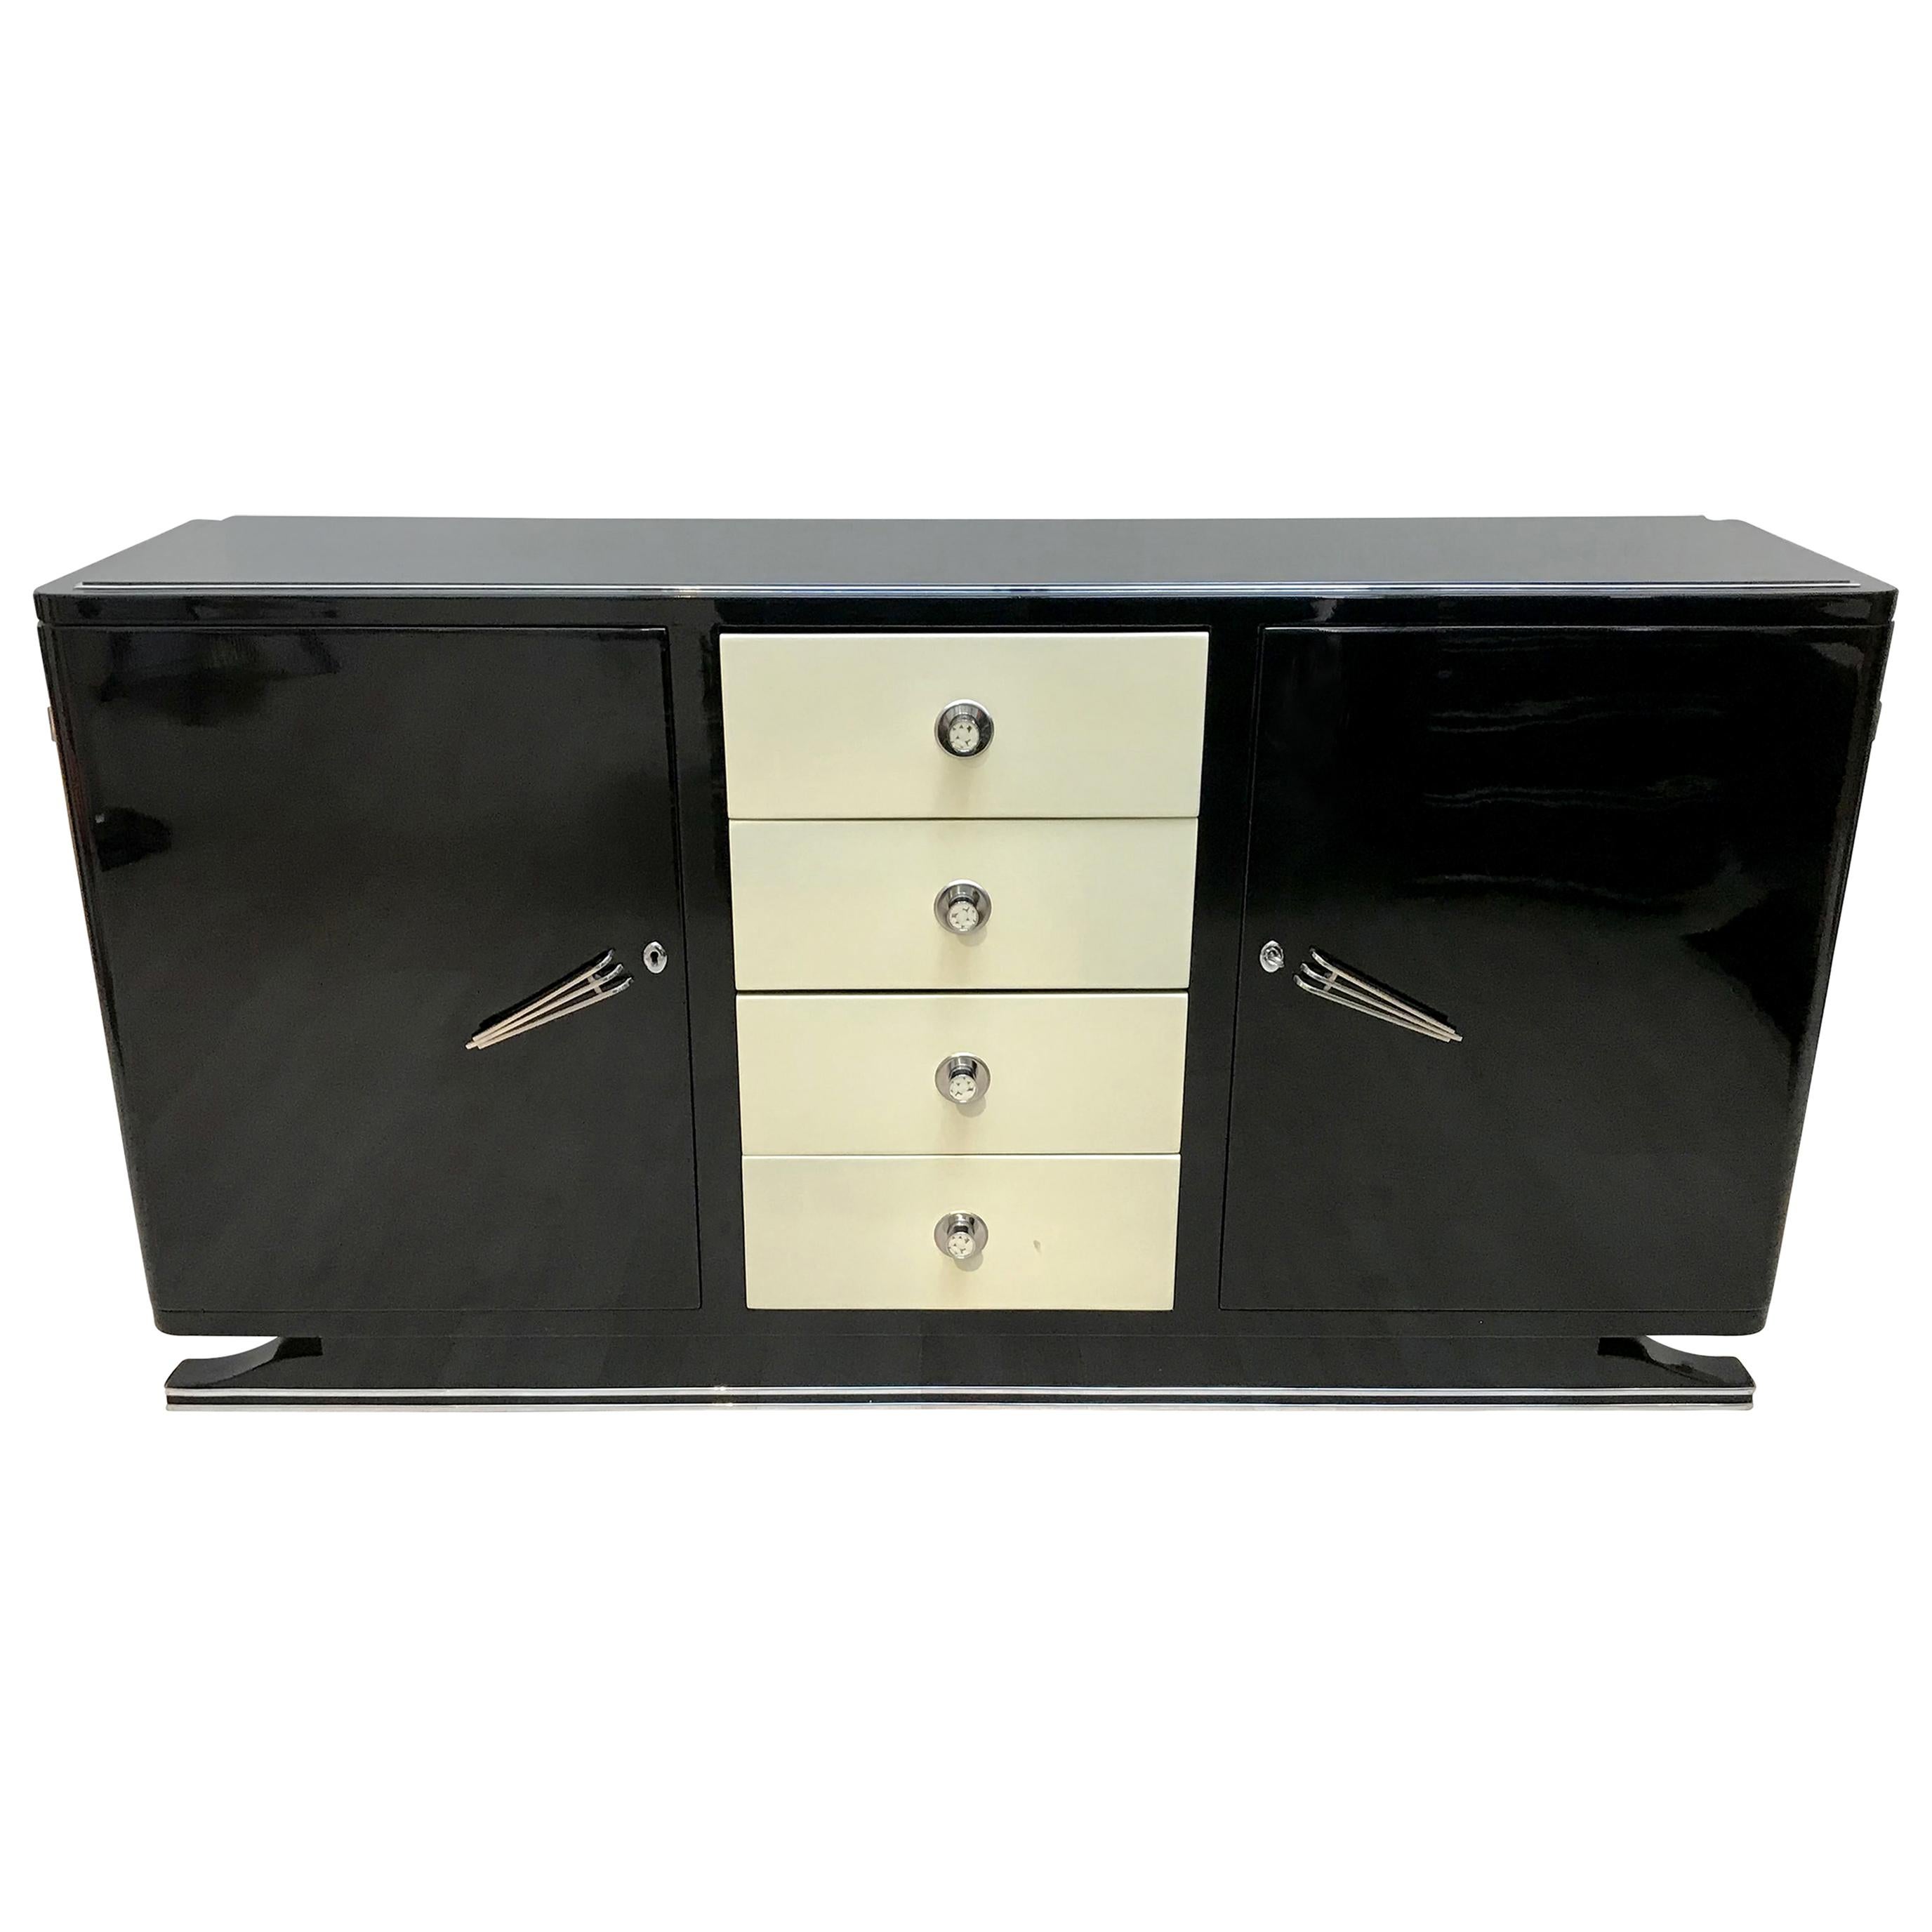 Art Deco Sideboard, Black and Creme Lacquer, France, circa 1930